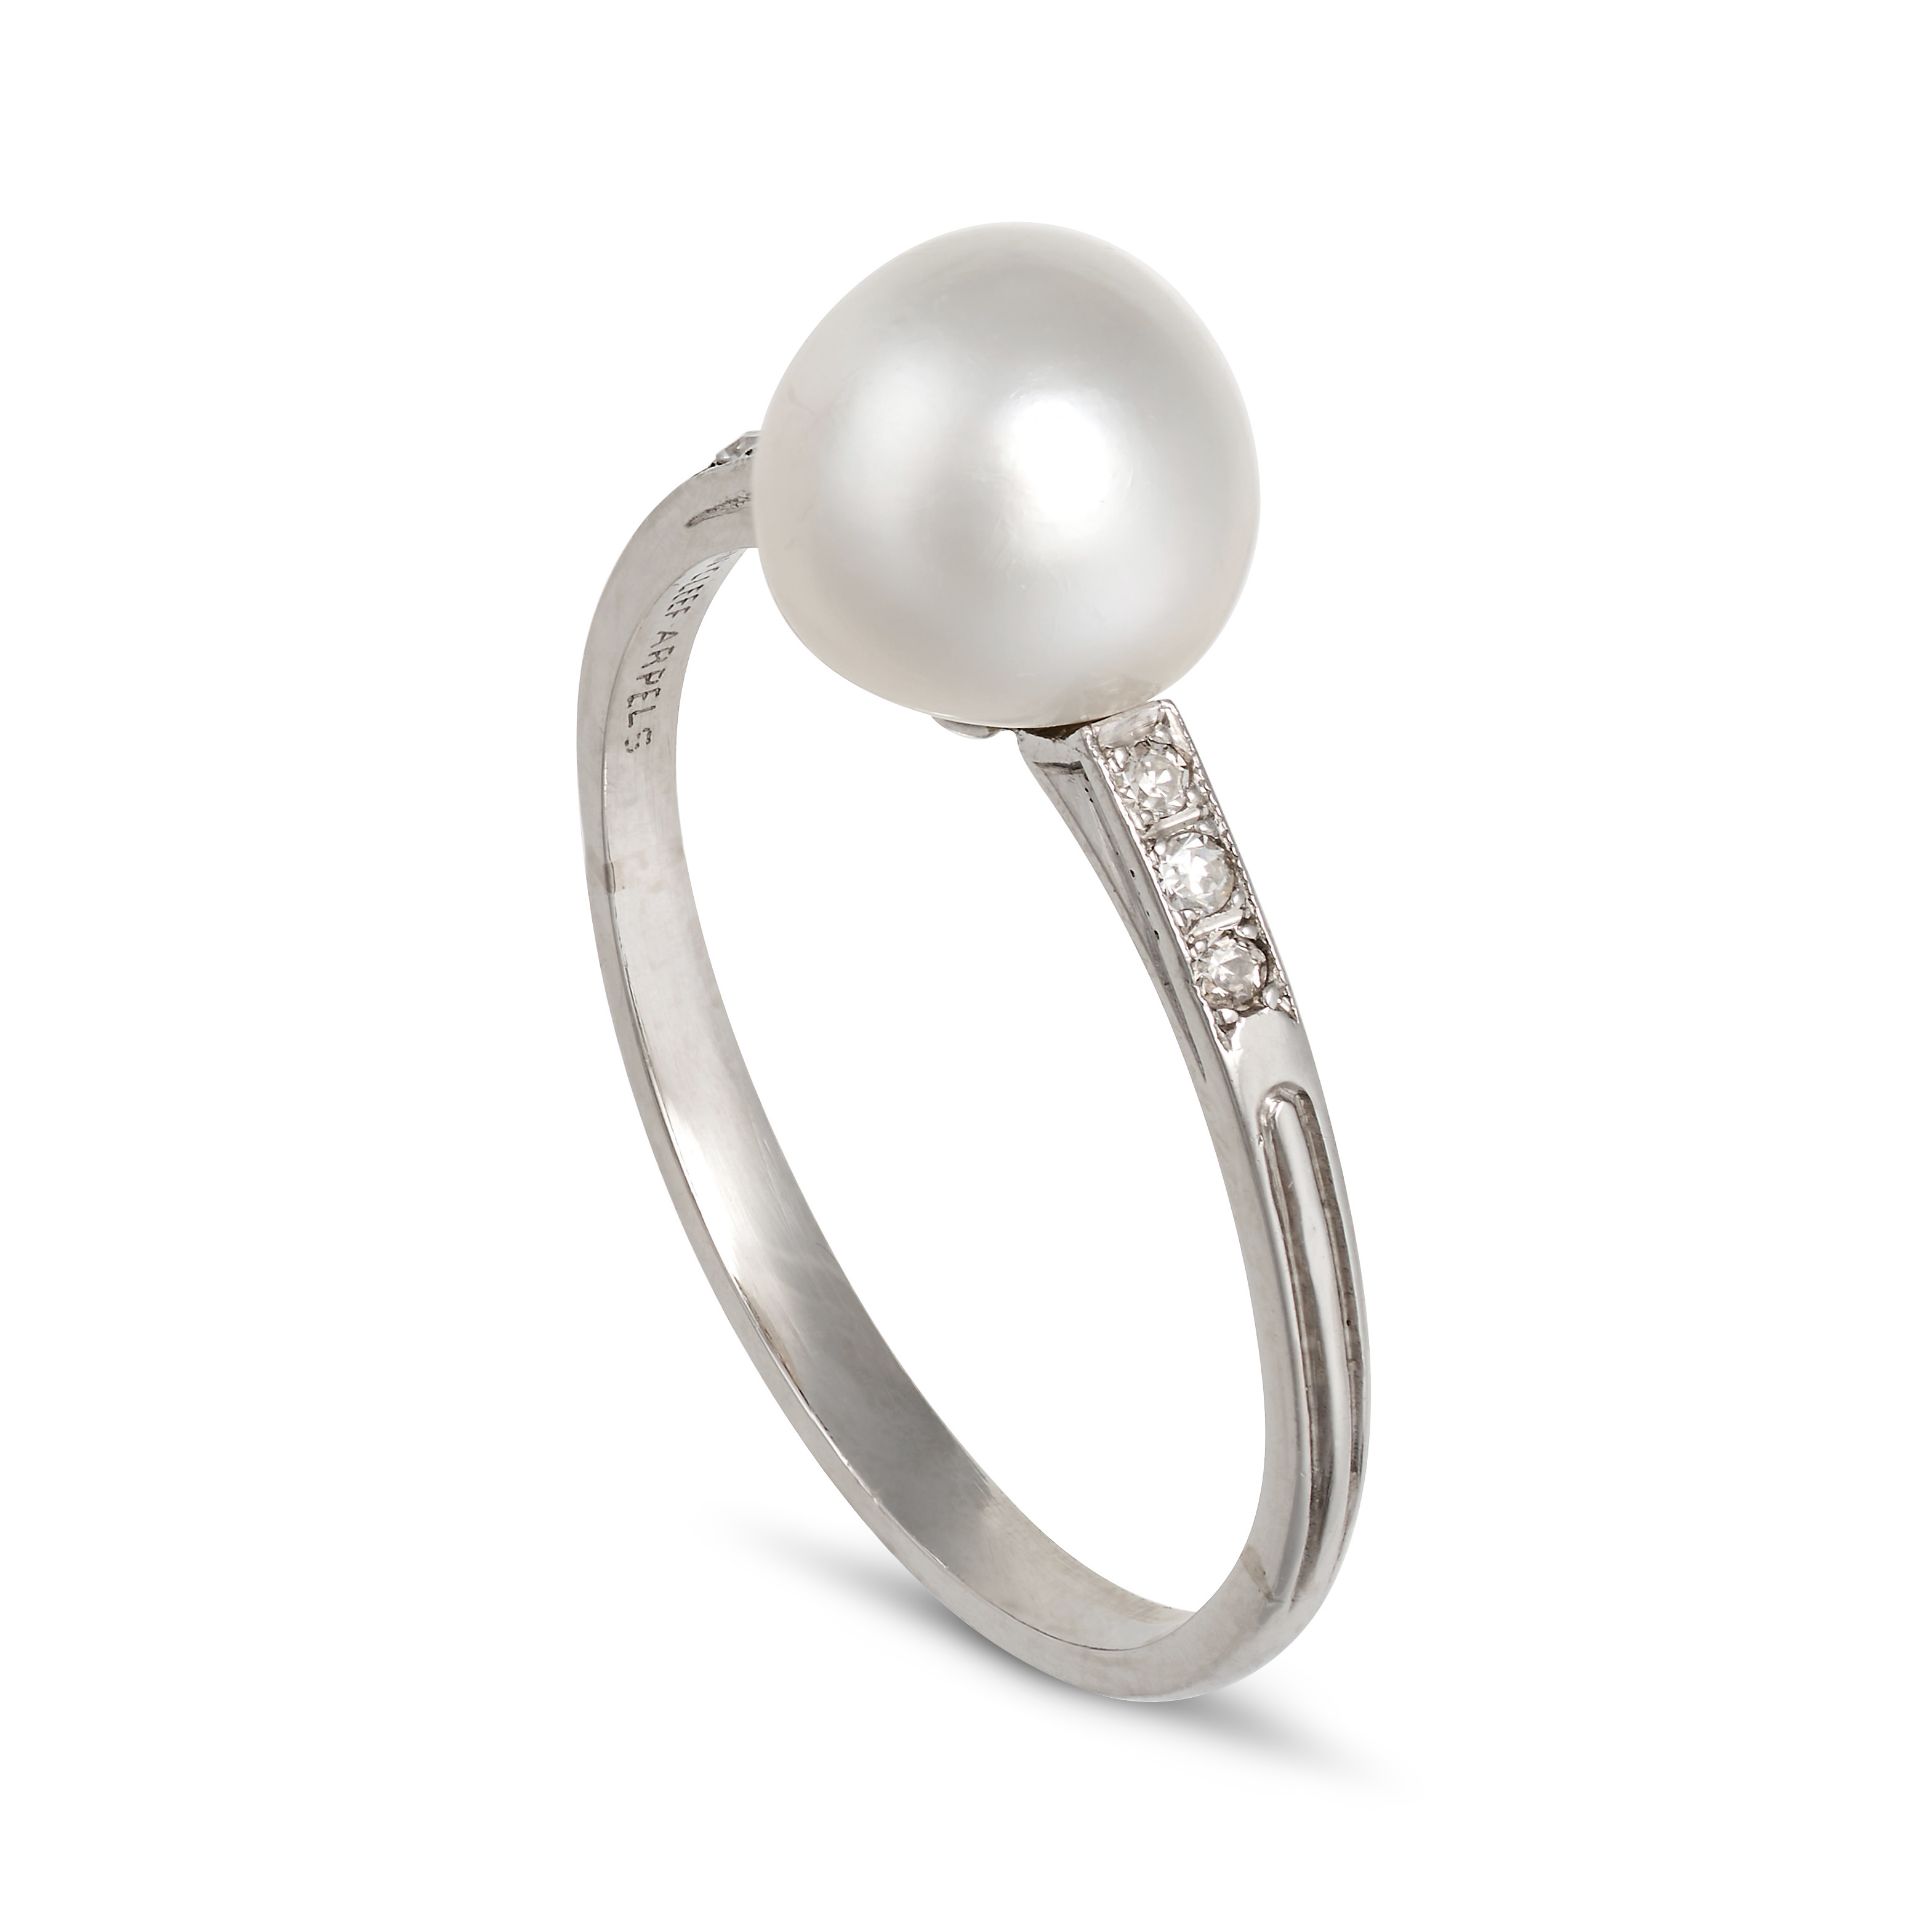 VAN CLEEF & ARPELS, A NATURAL SALTWATER PEARL AND DIAMOND RING in platinum, set with a pearl of 8... - Image 2 of 2